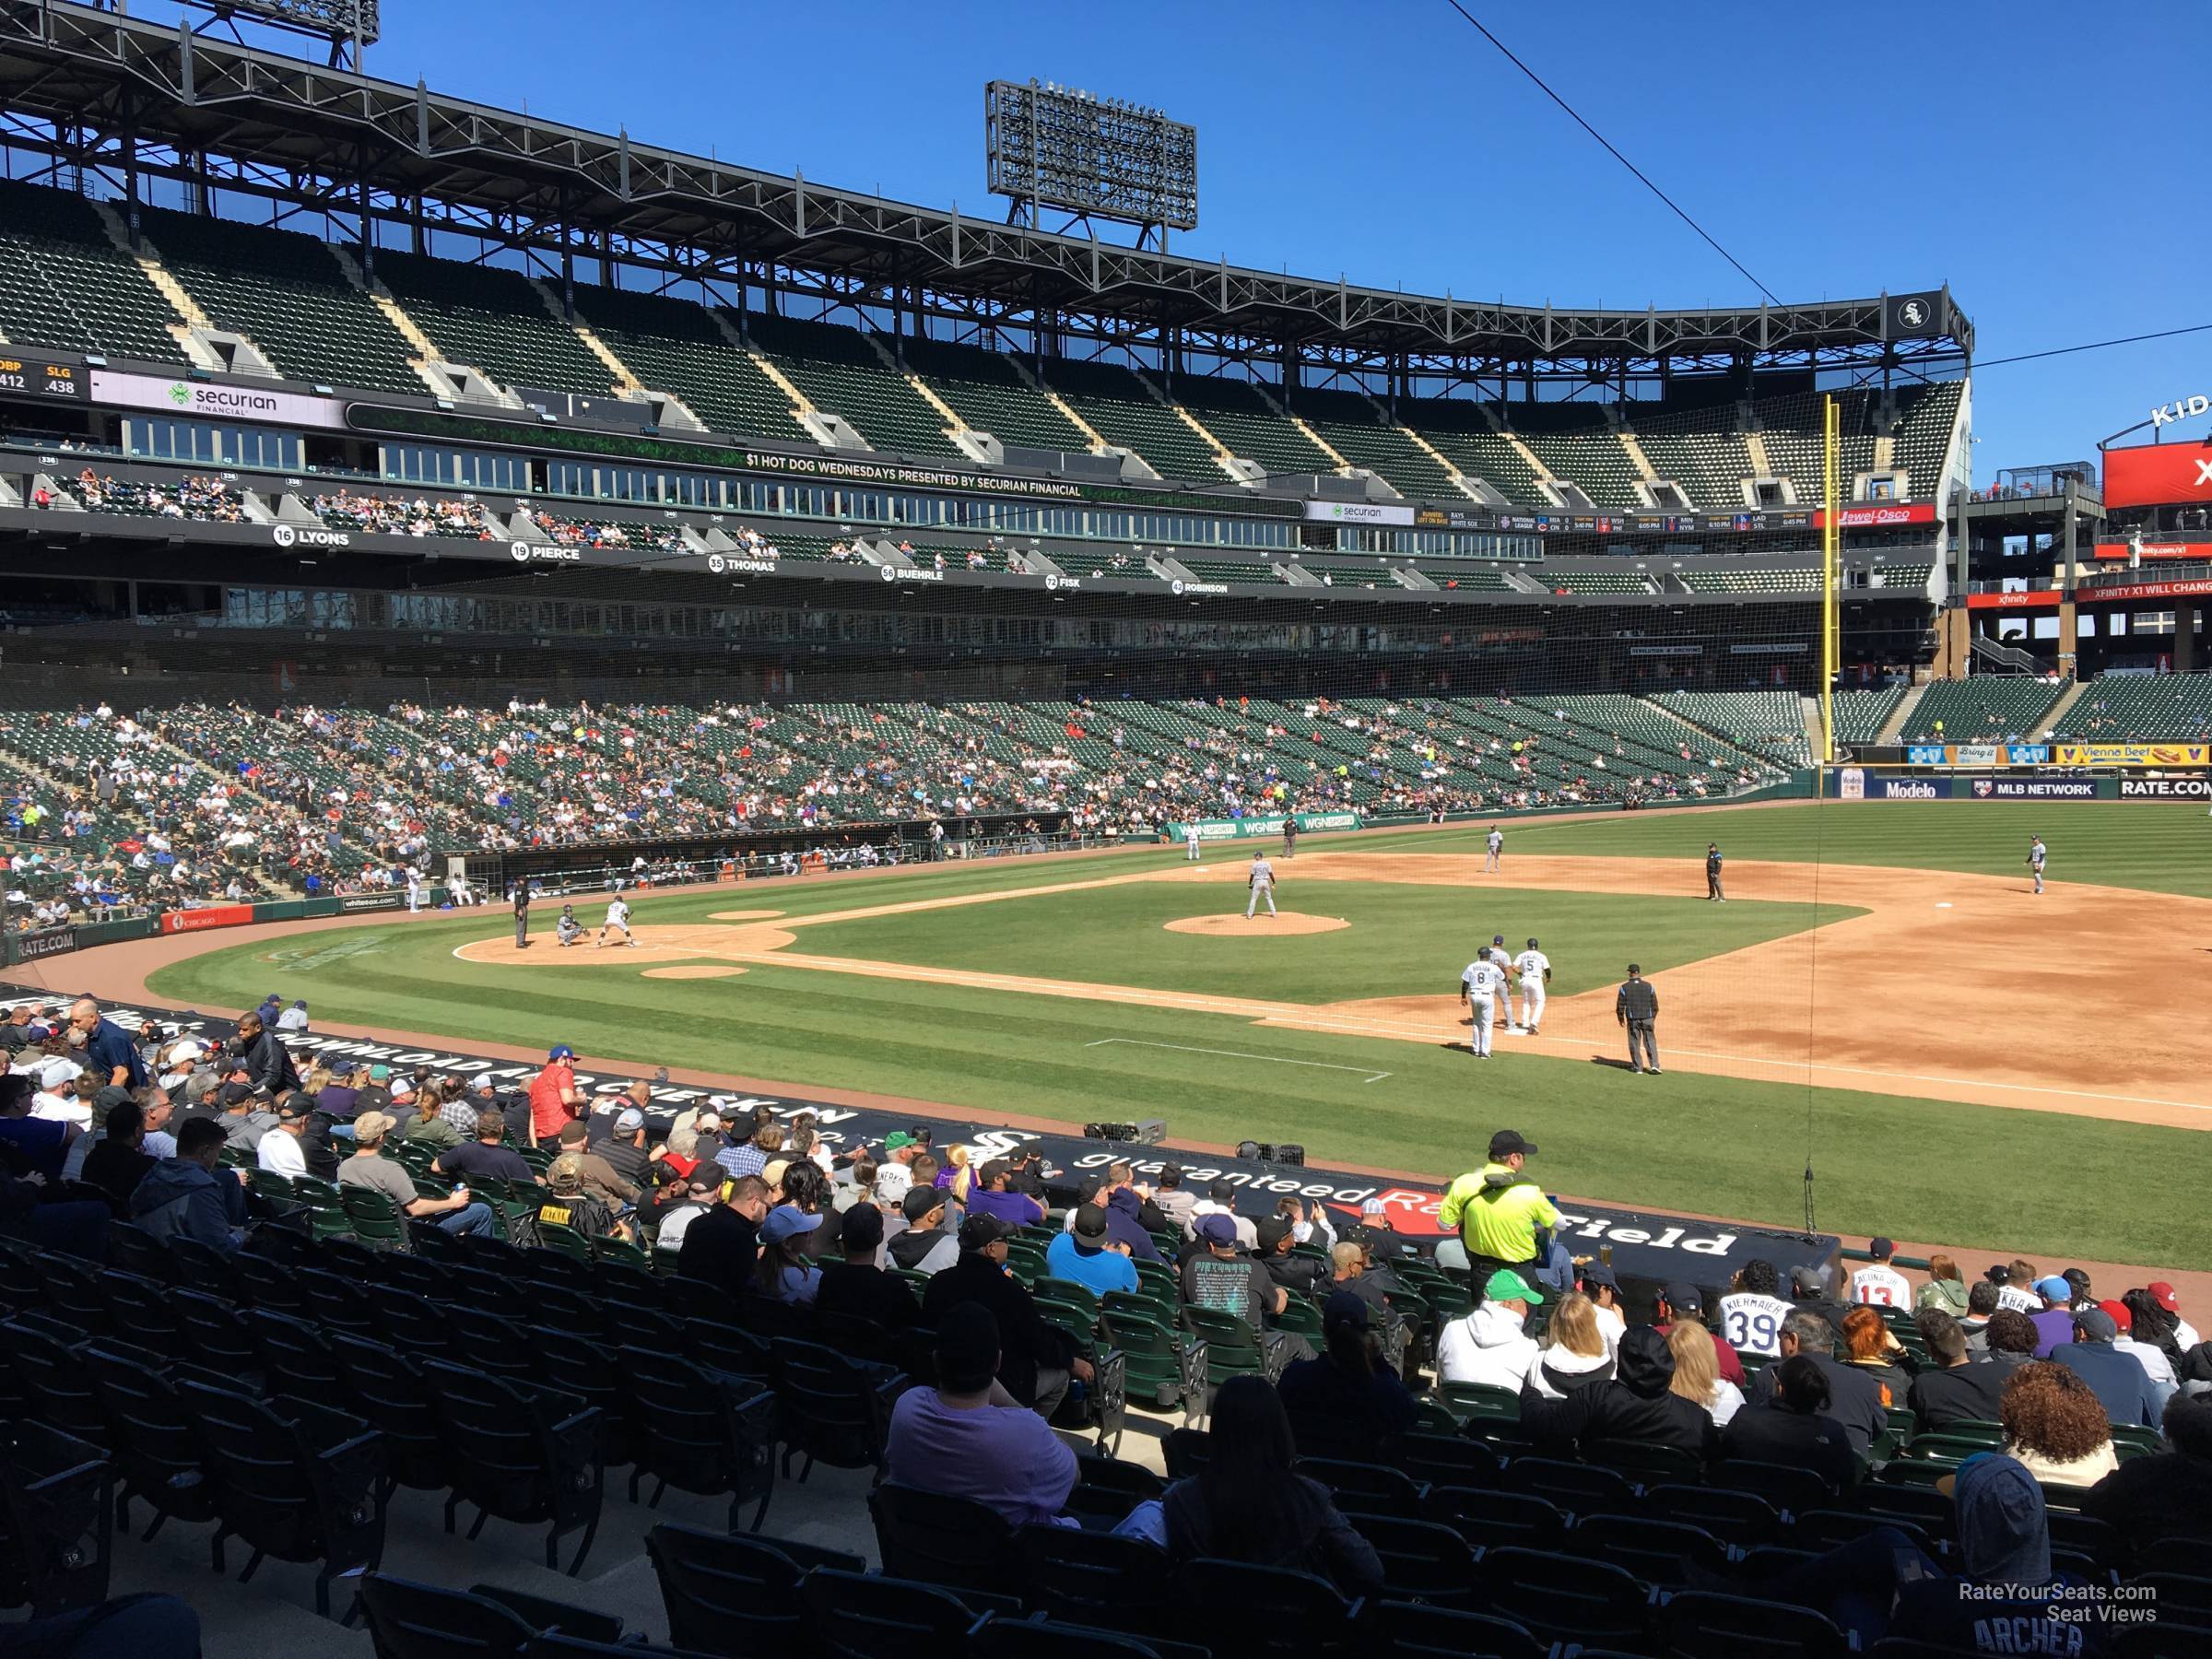 section 121, row 25 seat view  - guaranteed rate field